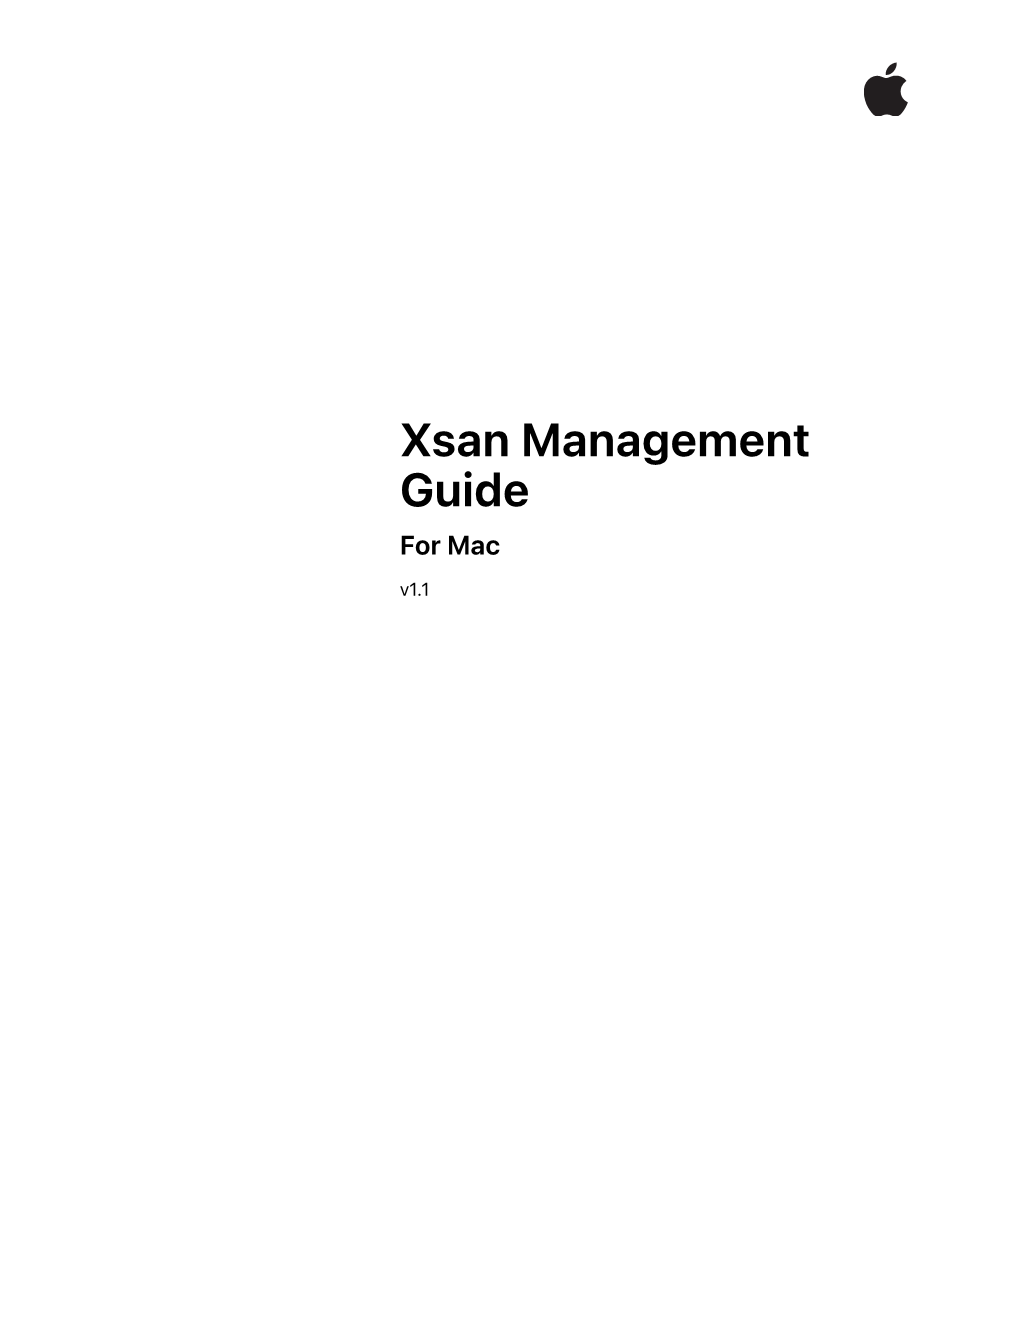 Xsan Management Guide for Mac V1.1 Contents